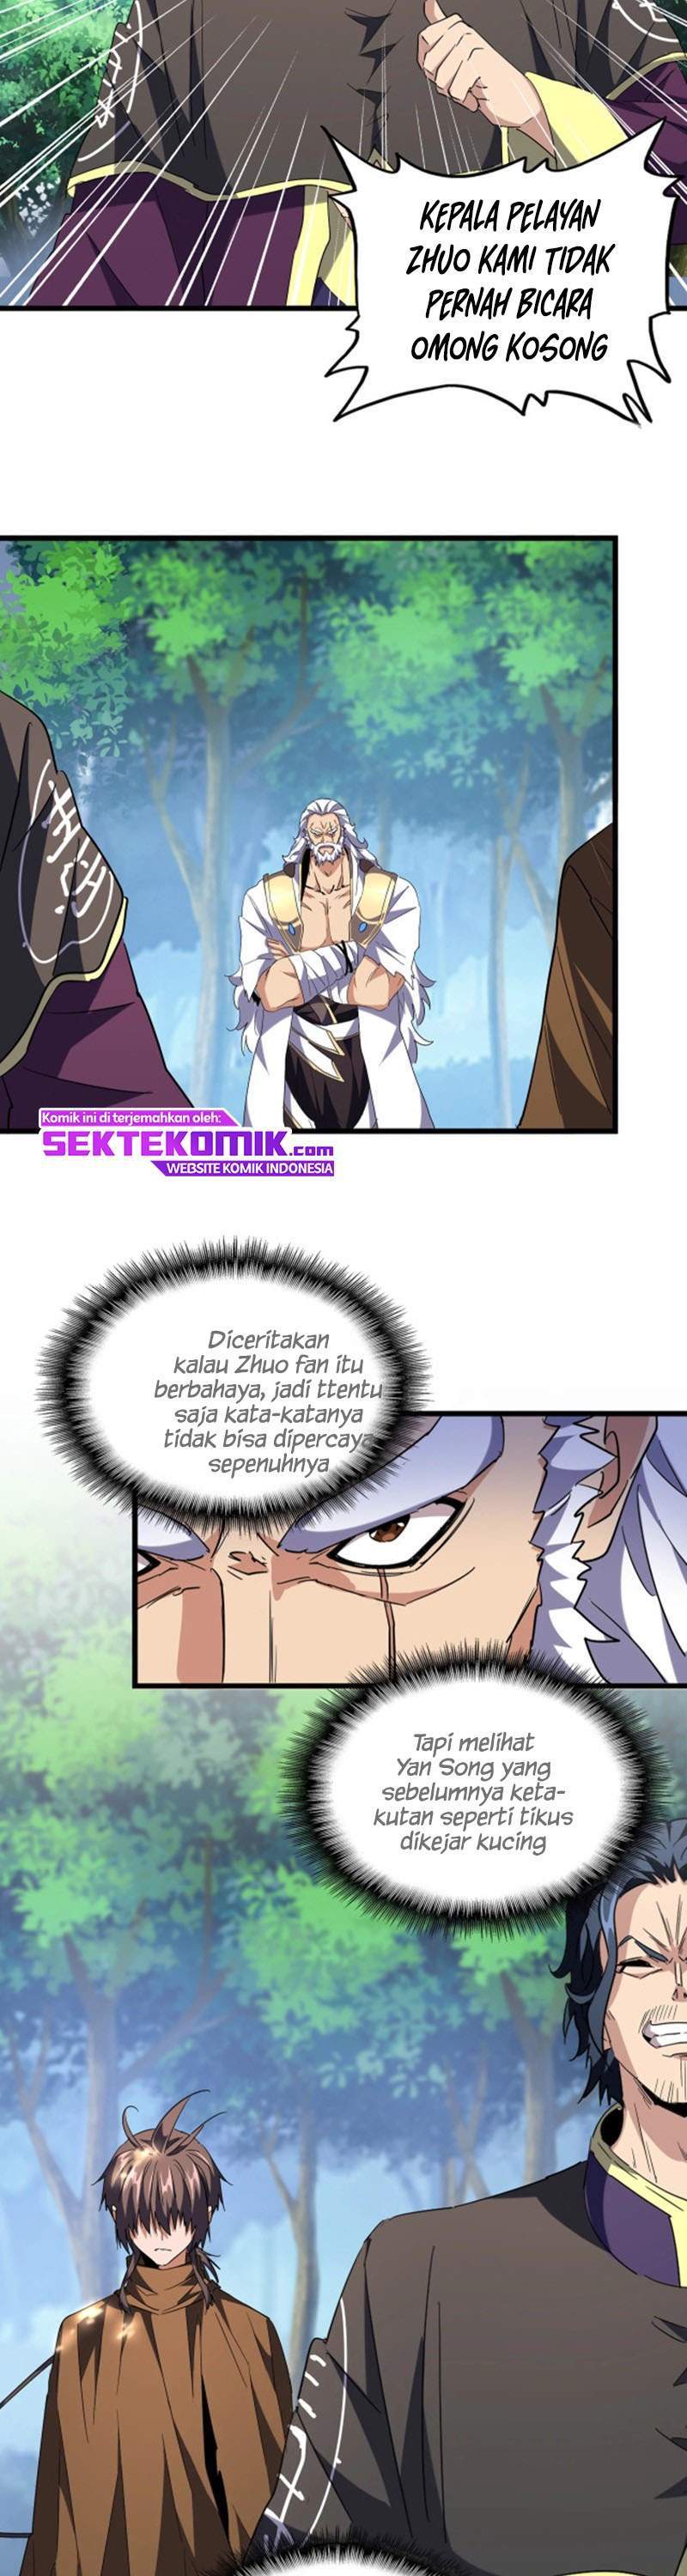 Magic Emperor Chapter 213 Image 3